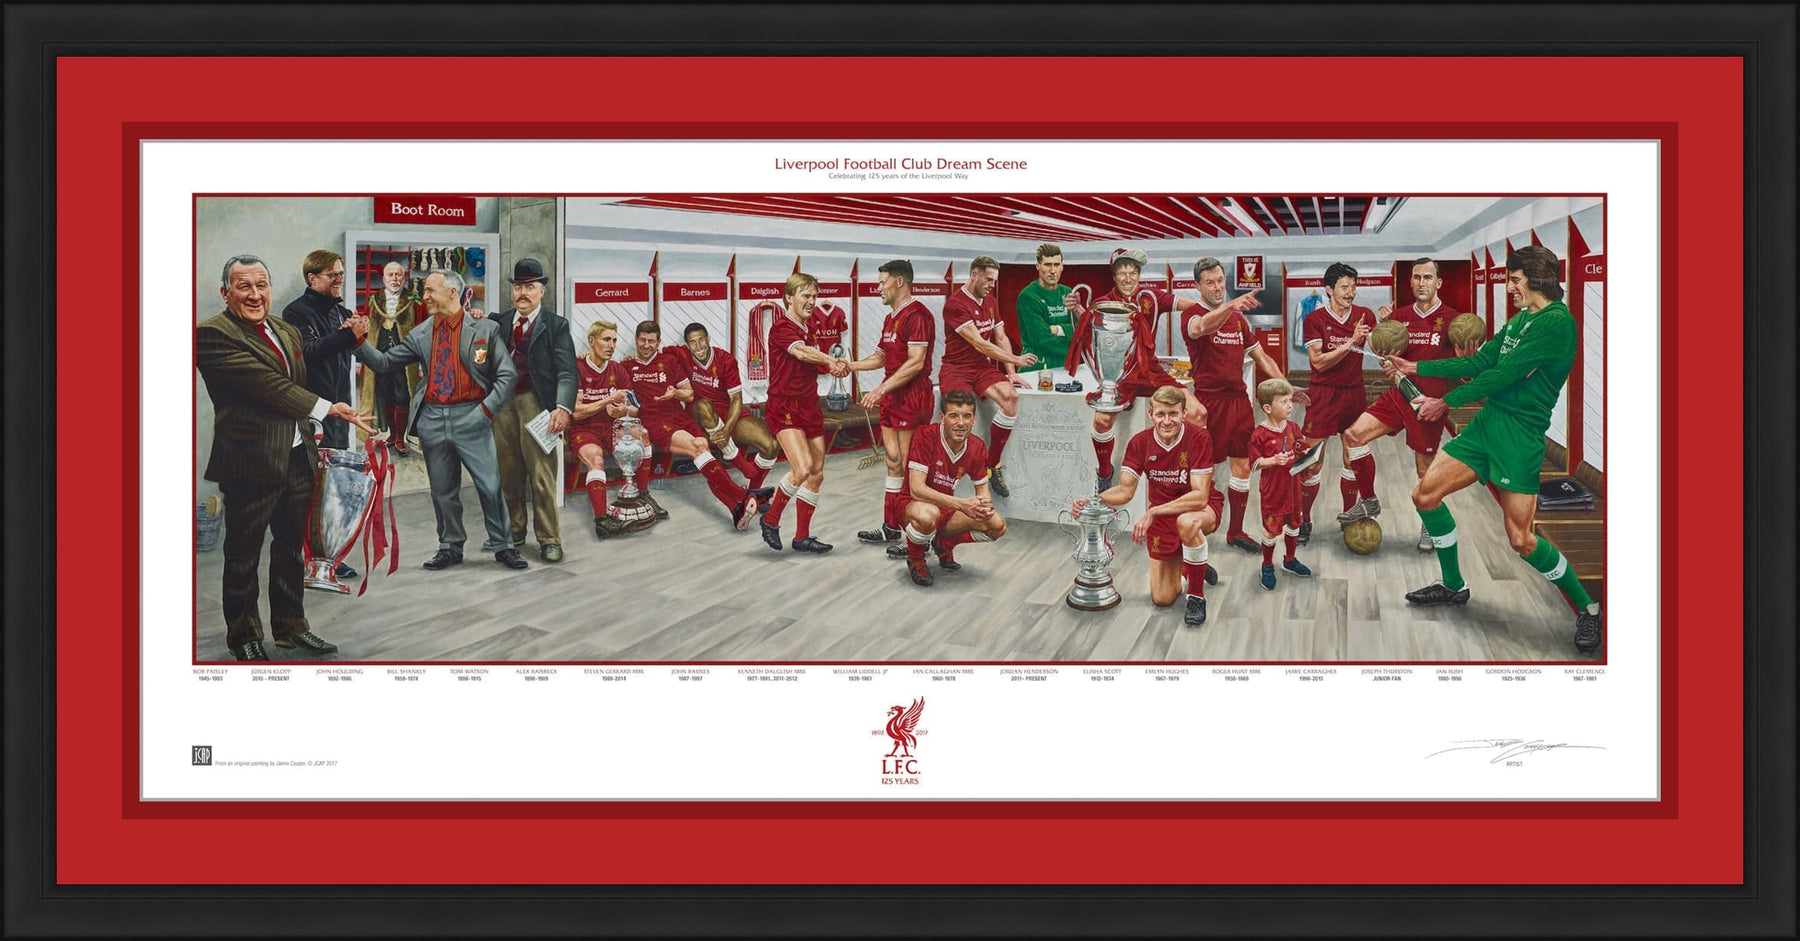 Liverpool Fc Exclusive Dream Scene Lithograph Artwork Print By Artist Jamie Cooper Dynasty Sports Framing